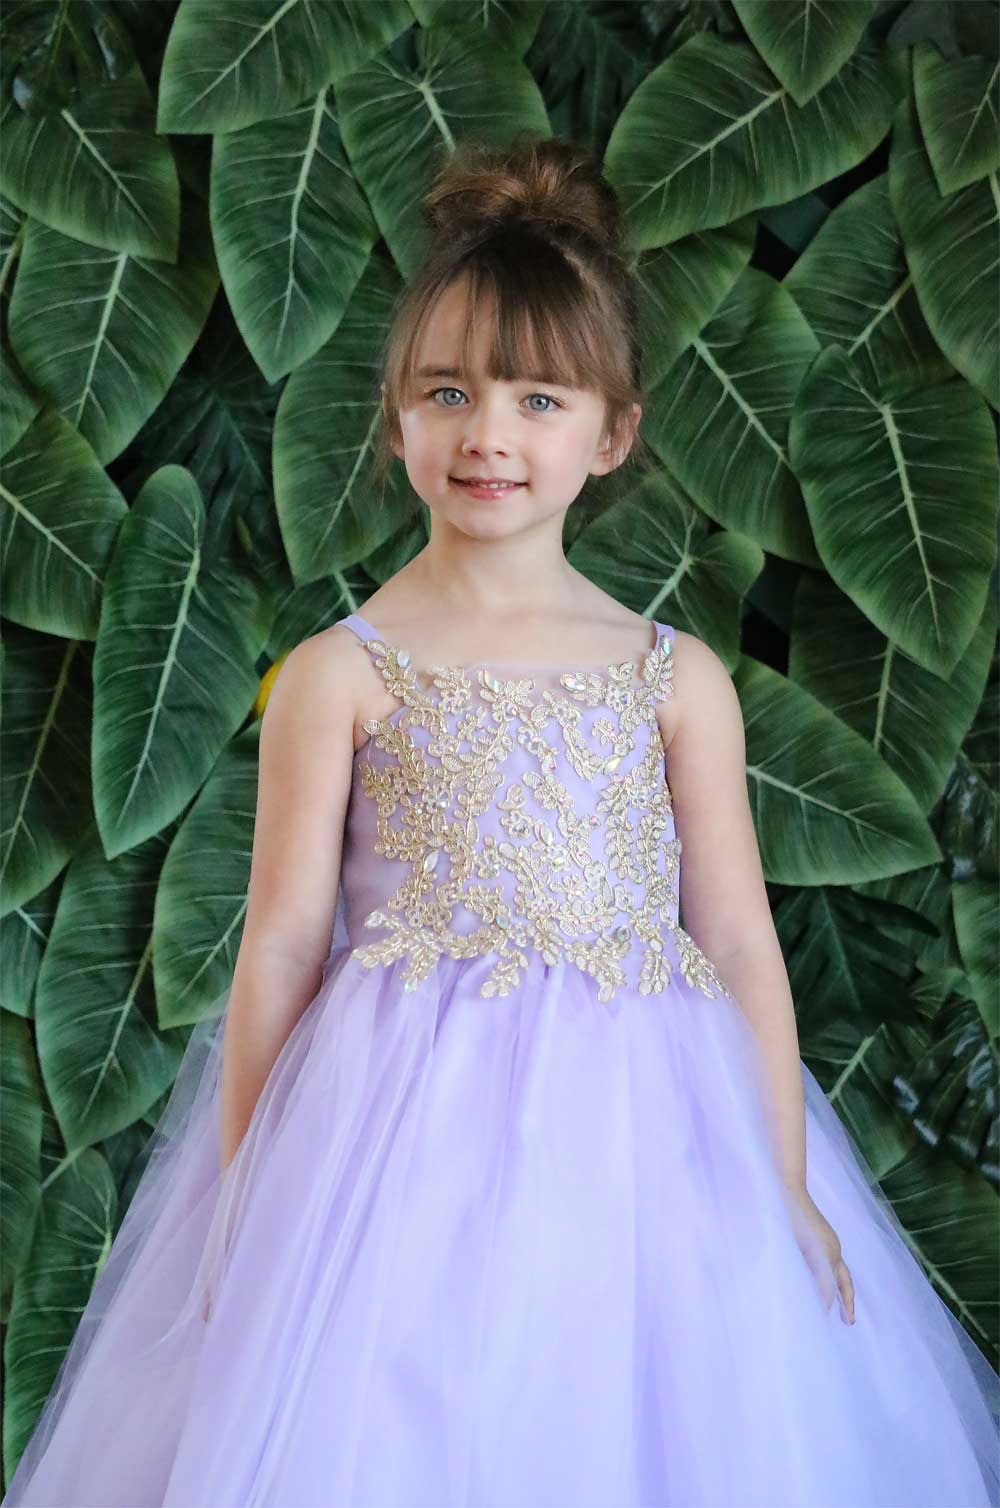 CA_D778LGD - Girls Dress Style D778 - LILAC-GOLD - Embroidered Bodice with  Tulle Skirt - New Items - Flower Girl Dresses - Flower Girl Dress For Less